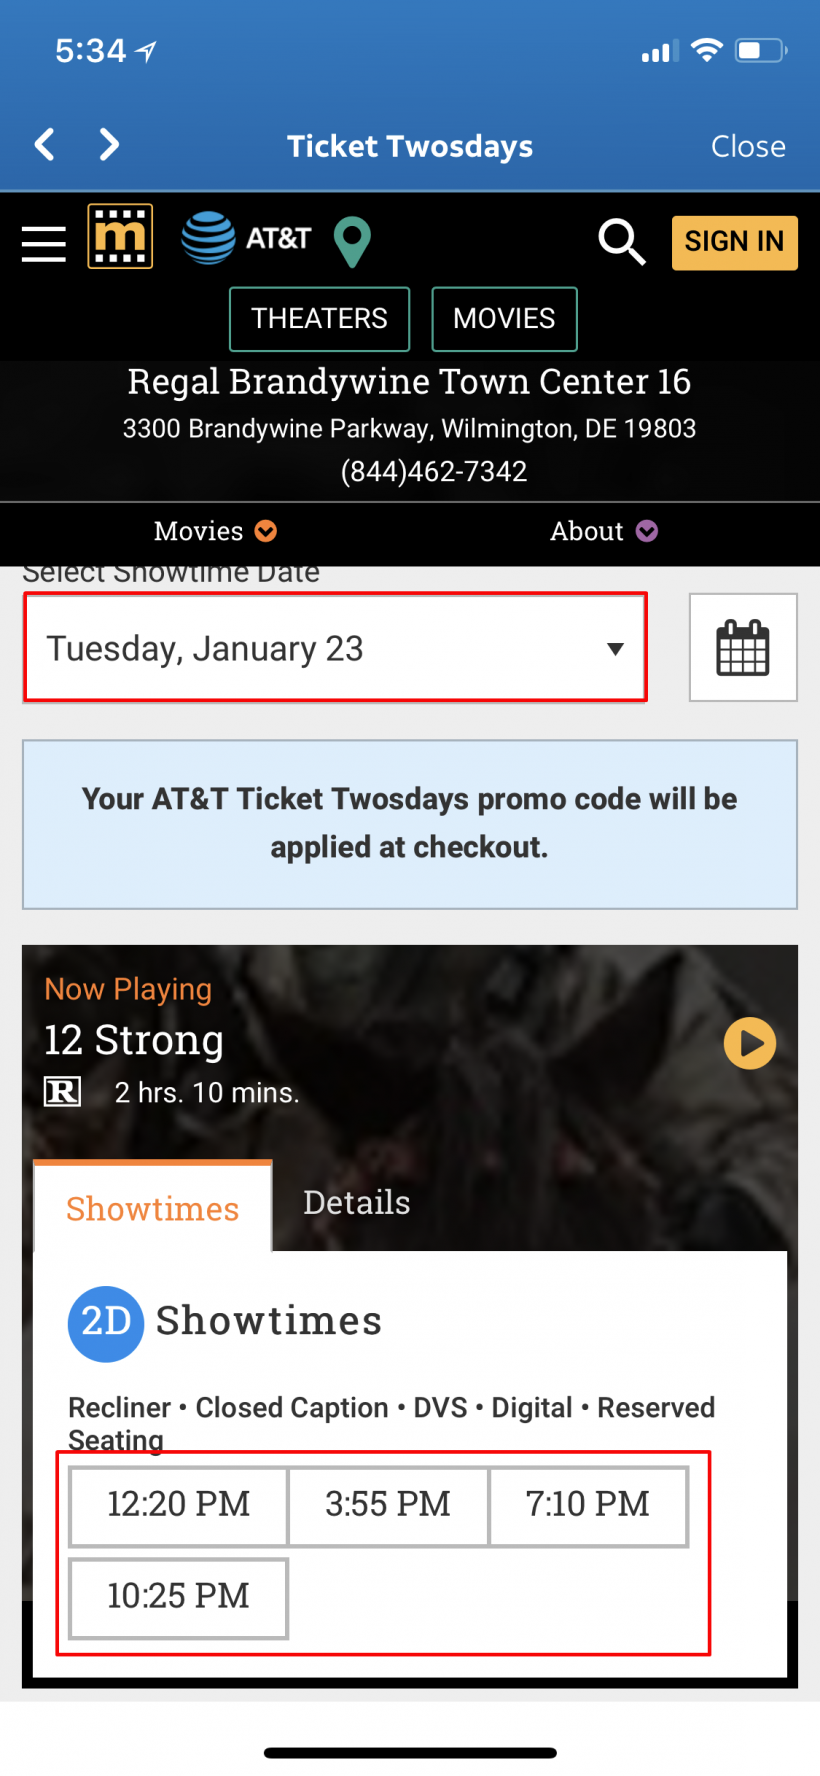 How to get free movie tickets, magazine subscriptions and other rewards from the AT&T Thanks app for iPhone and iPad.